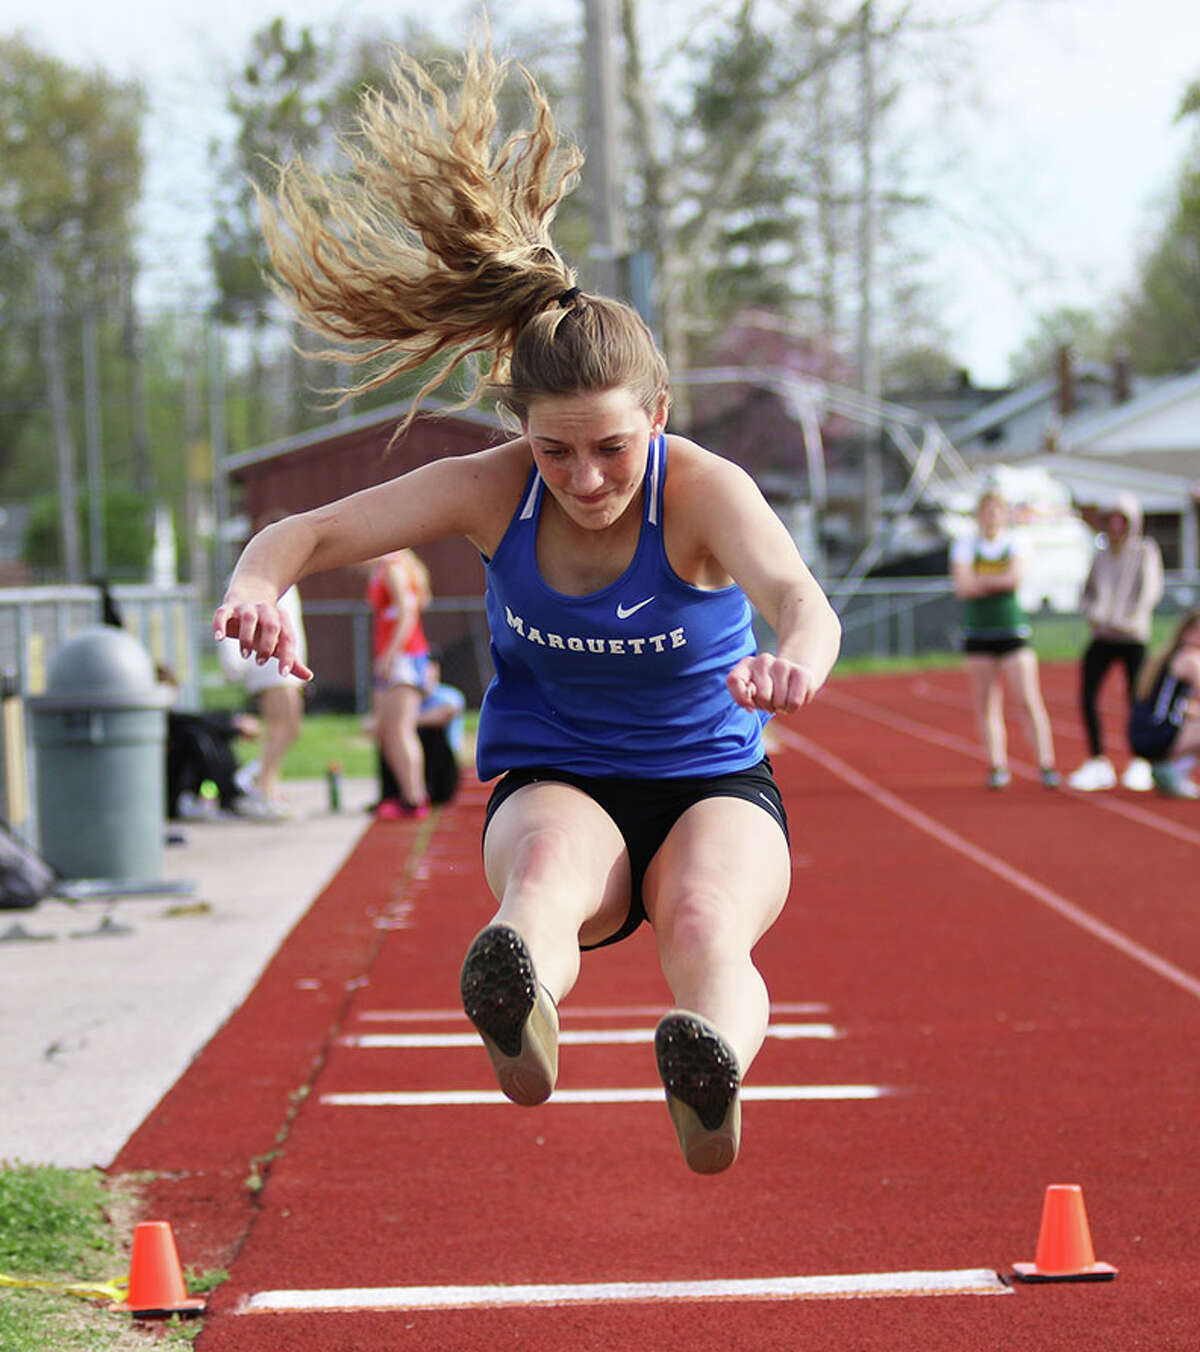 Marquette's Sammy Hentrich finished first in the long jump at Thursday's Staunton relays.